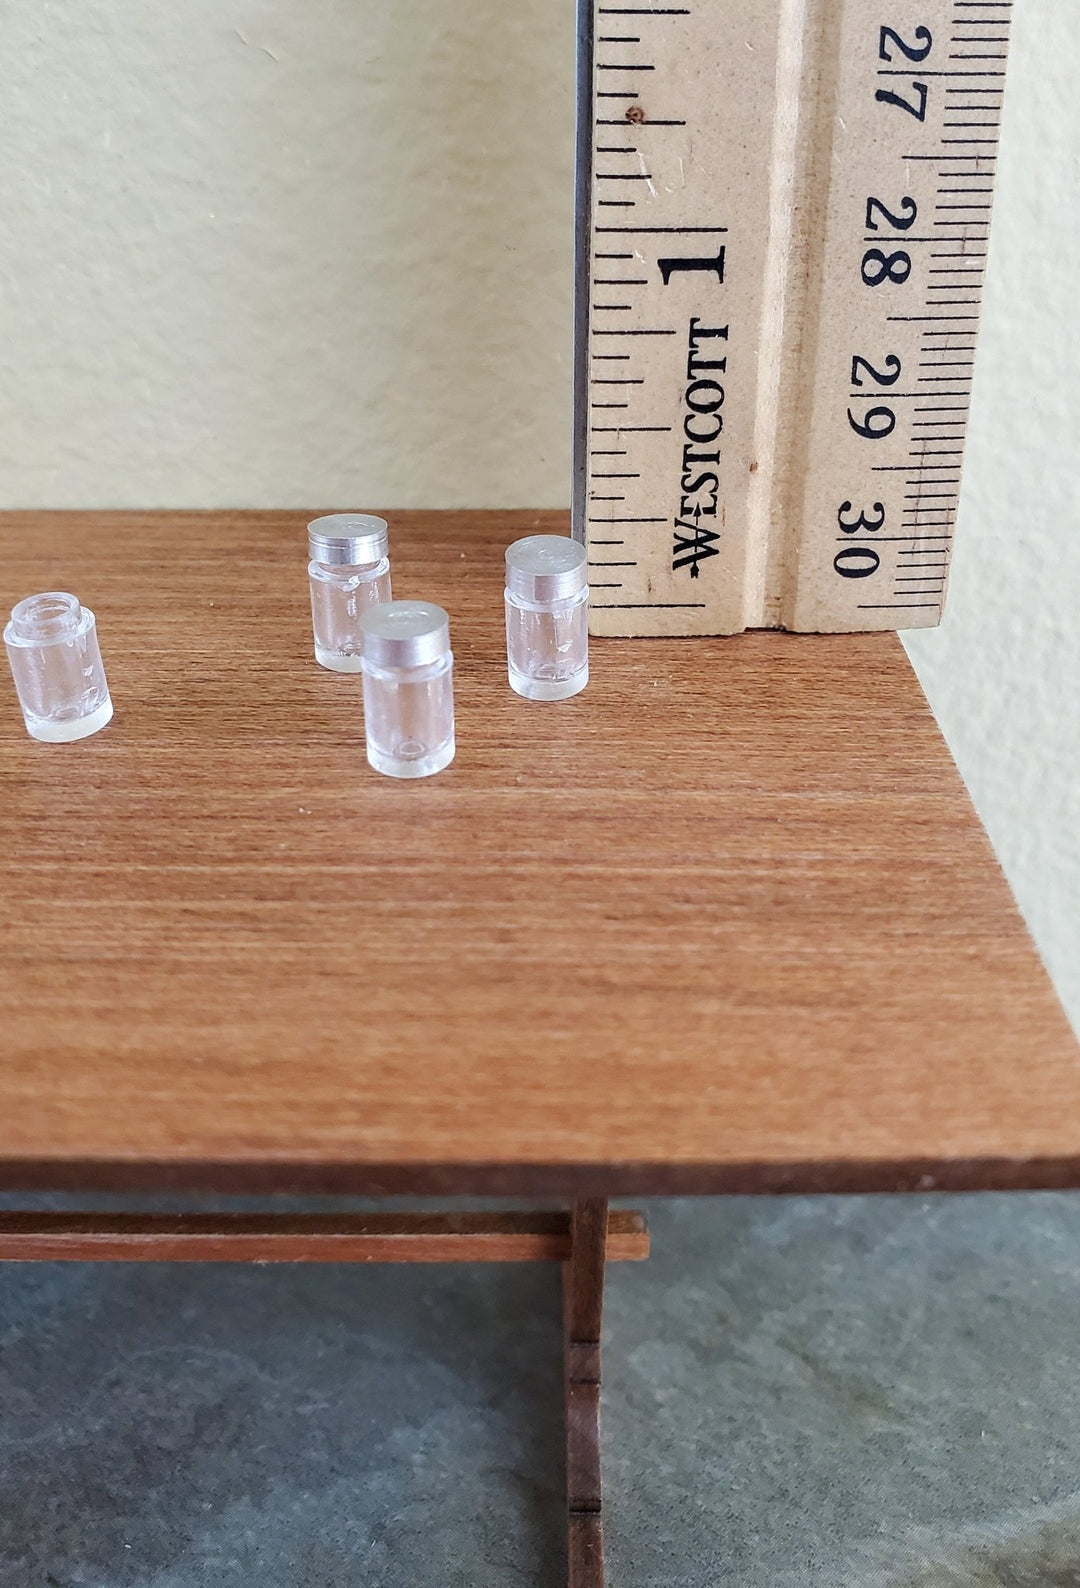 Dollhouse Miniature Jars Small for Spices or Baby Food with Lids x6 1:12 Scale - Miniature Crush